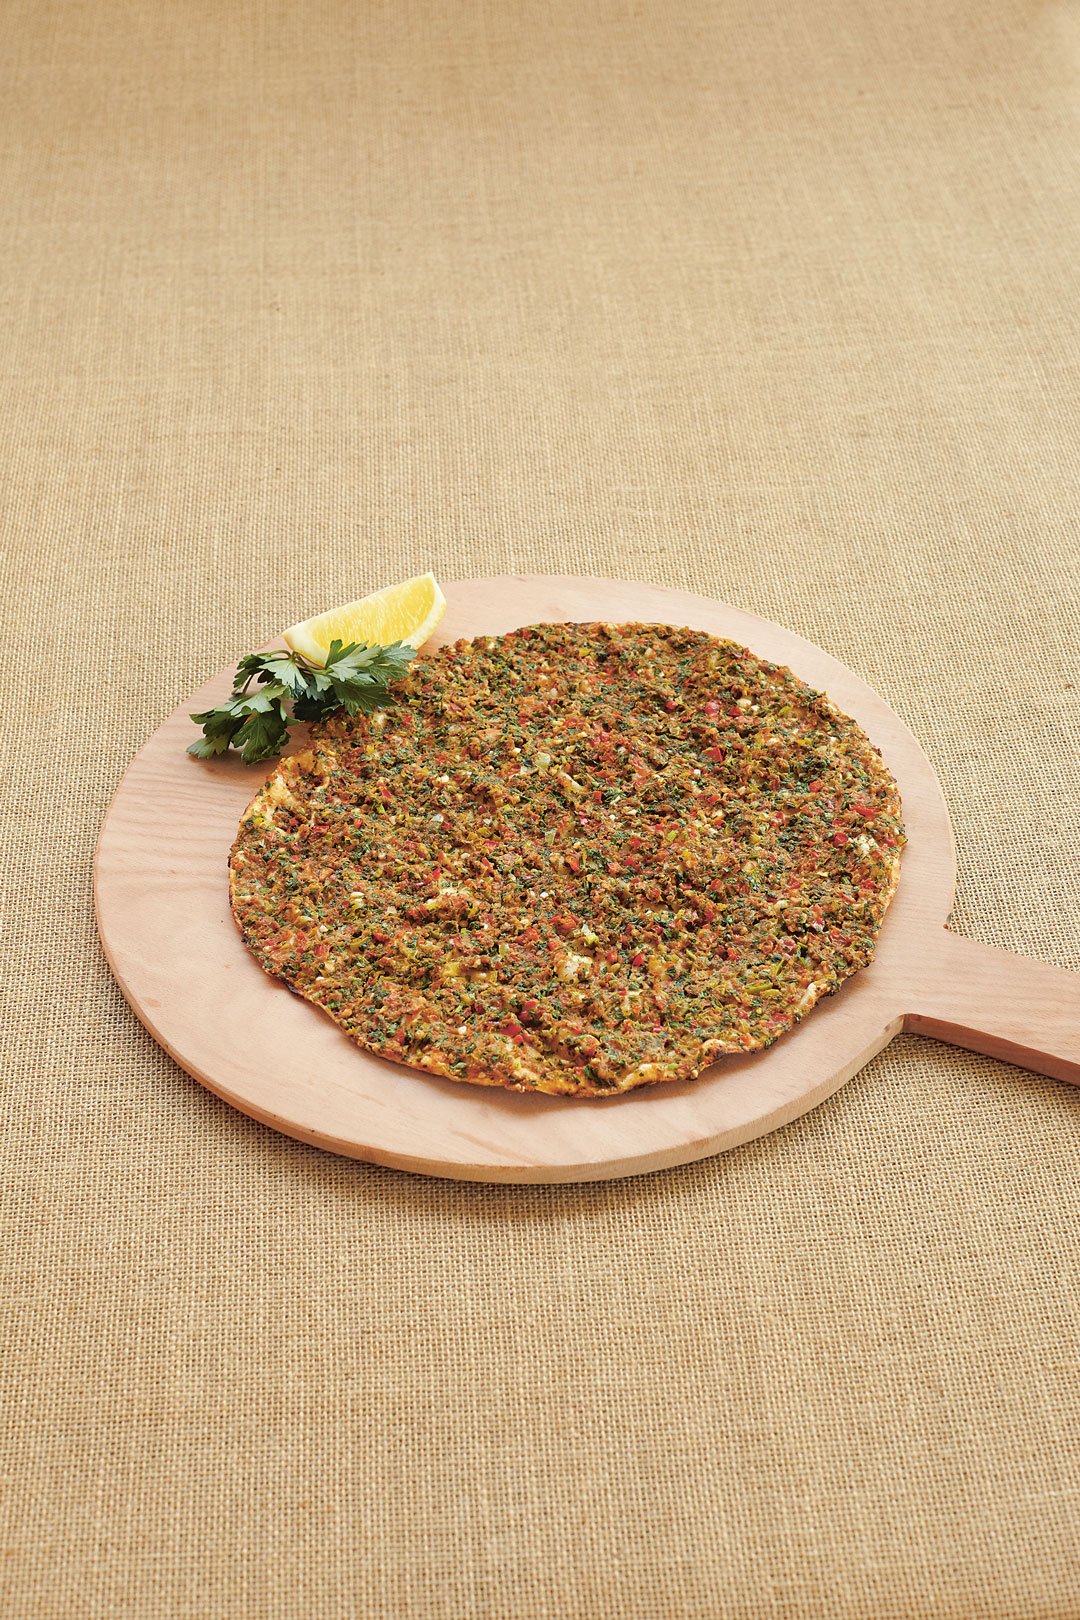 Lahmacun, from The Turkish Cookbook